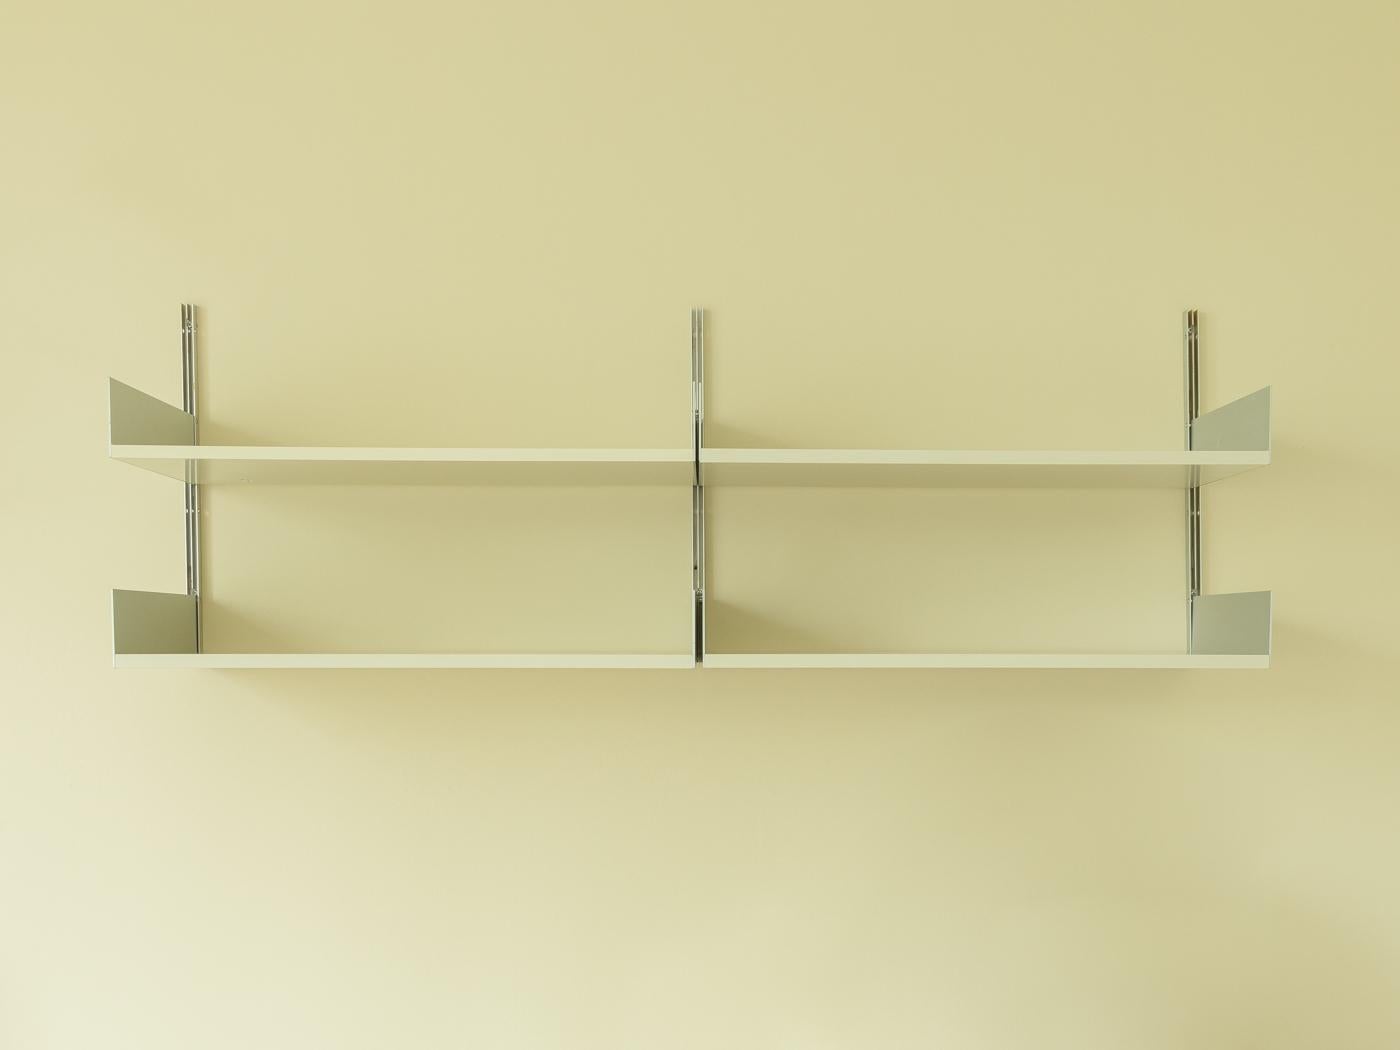 Modular 606 shelving system by Dieter Rams for Vitsœ from the 1960s. High-quality construction consisting of two aluminium E Tracks and four shelves.

Quality Features:
-accomplished design: perfect proportions and visible attention to